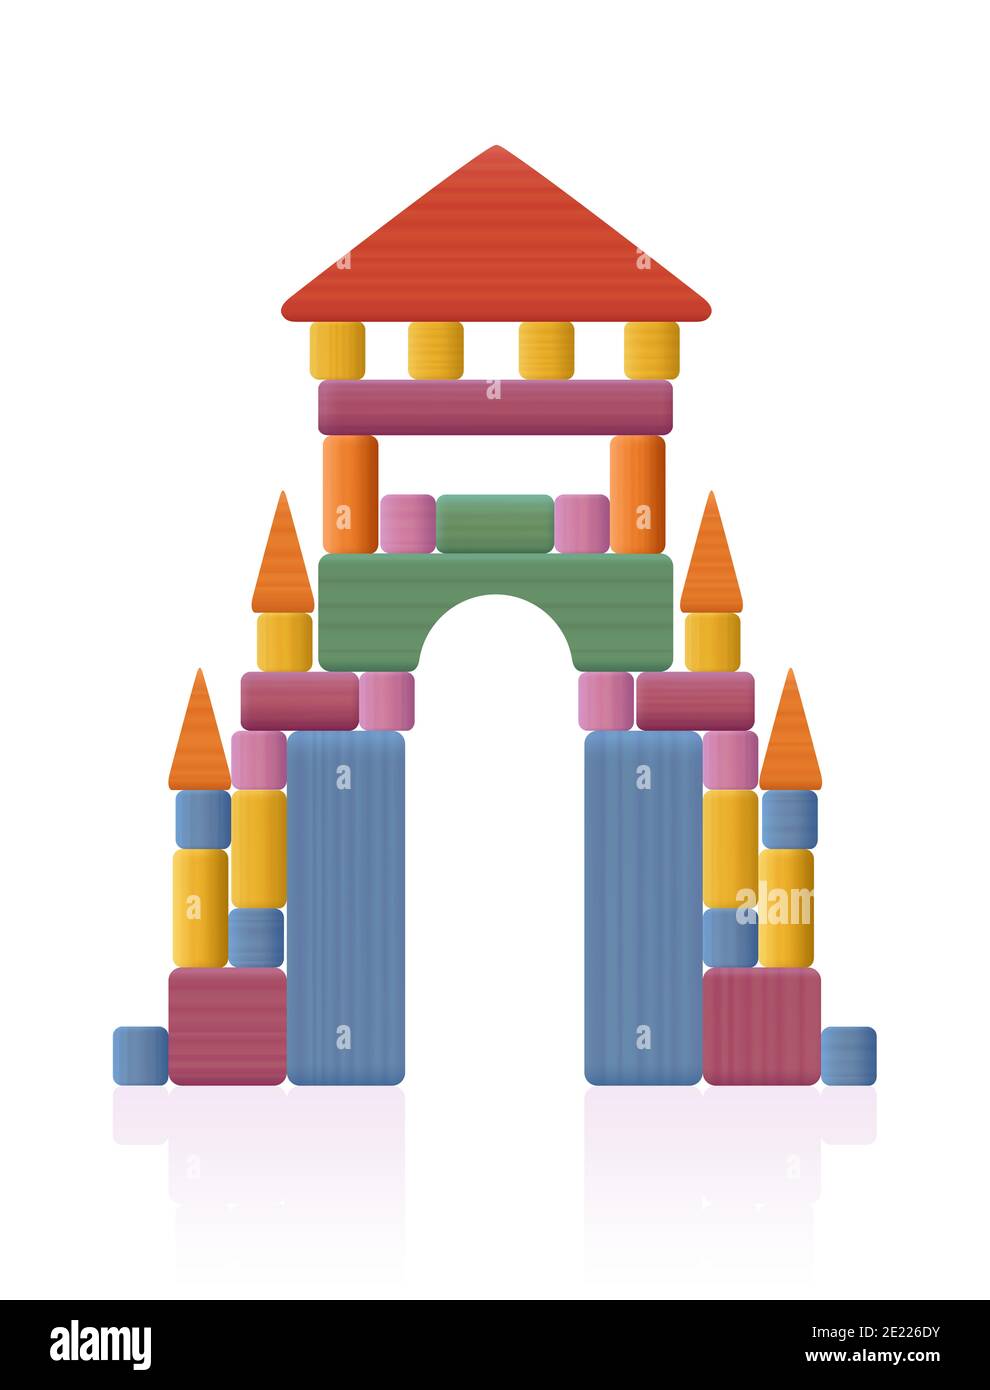 Portal, gate, thoroughfare built of wooden toy blocks. Many different natural wood elements - a typical childhood concentration game. Stock Photo